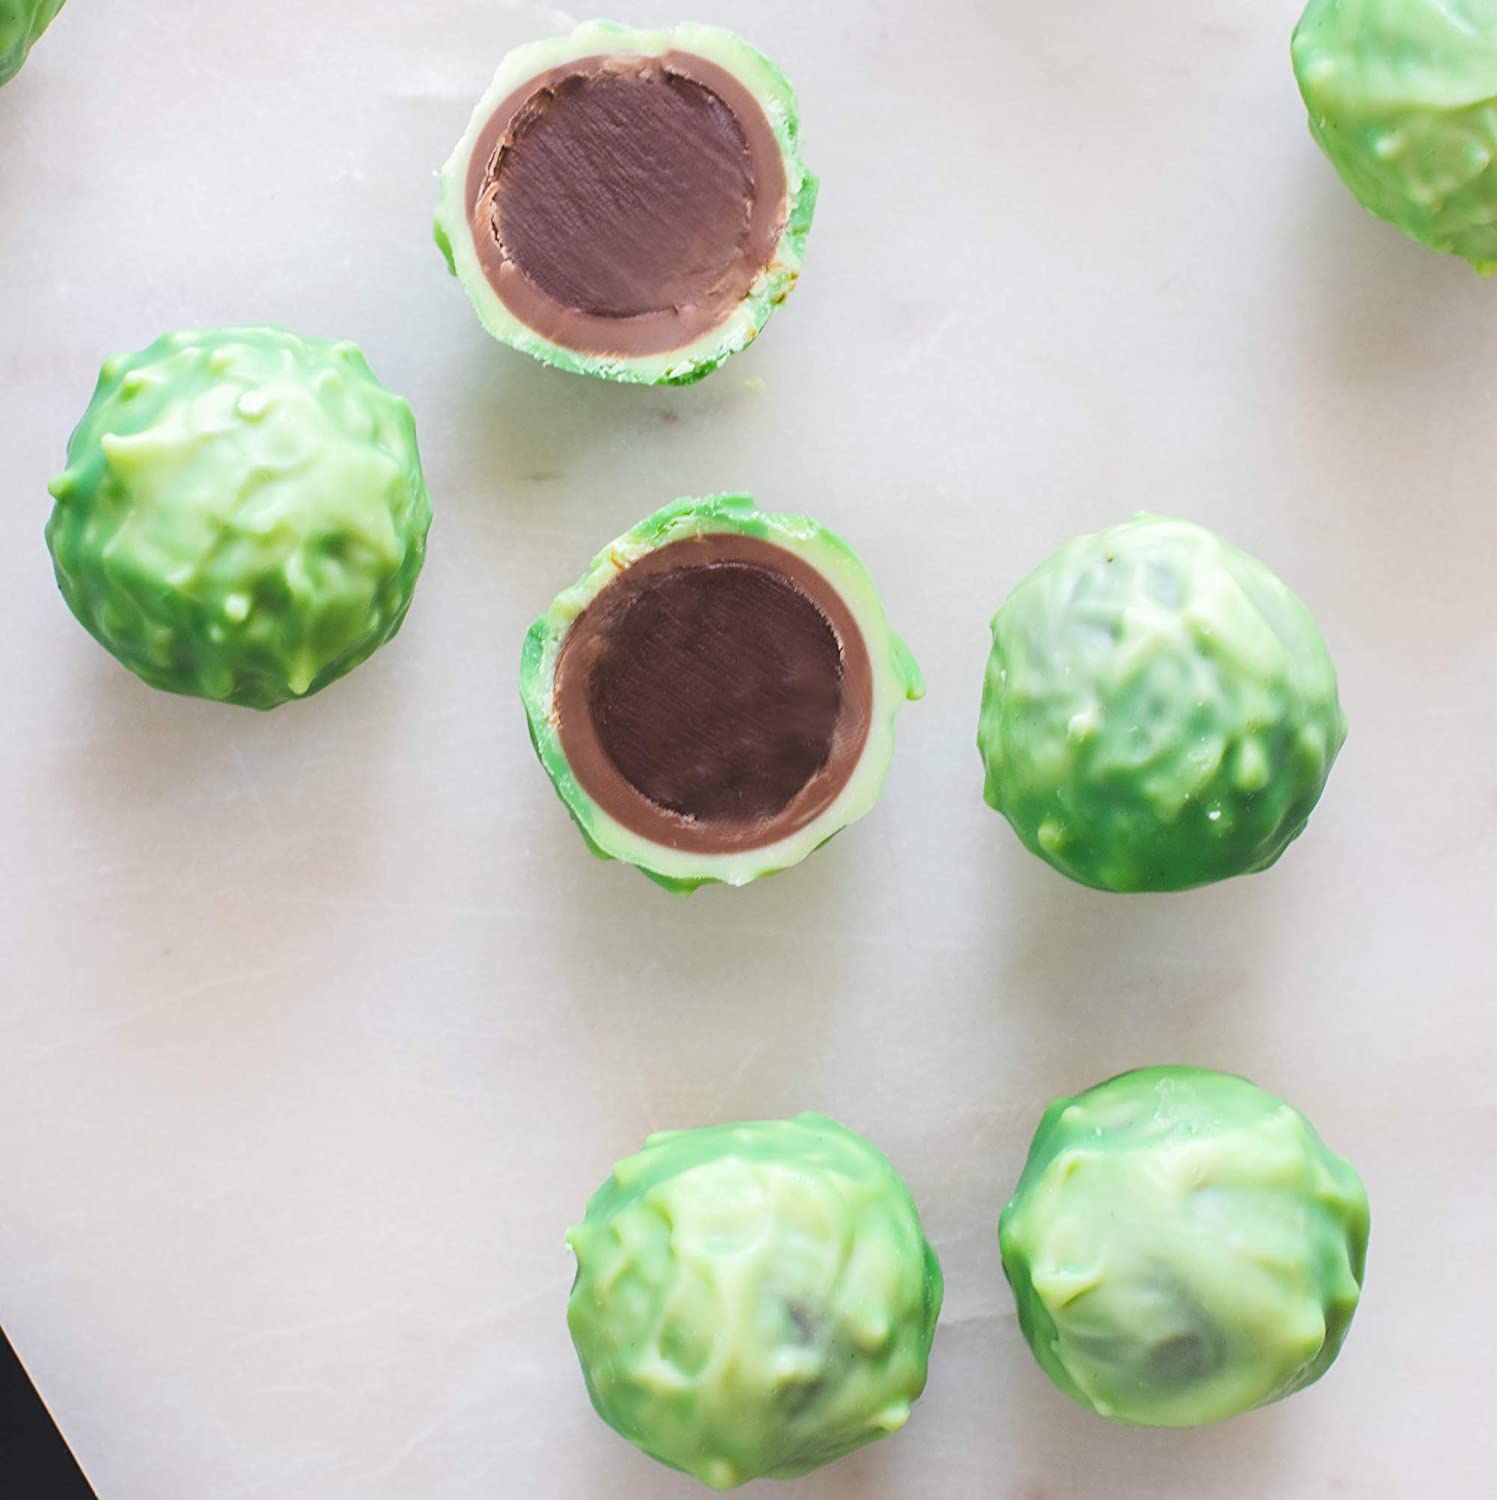 Asda's Bruce the Brussel Sprout cake is back for Christmas